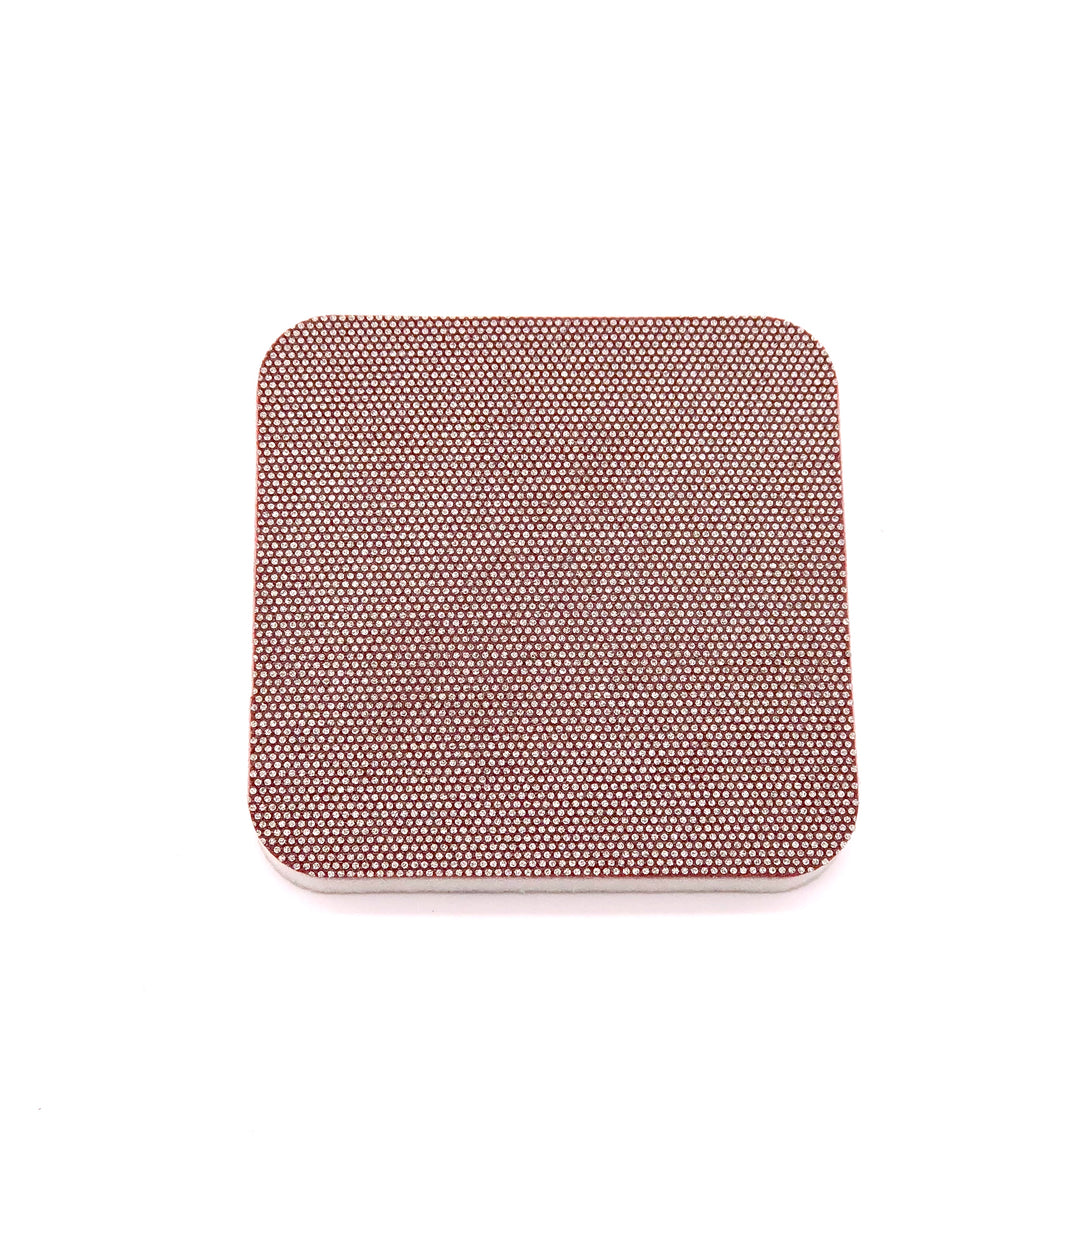 Flexible Diamond Pad with Rounded Corners